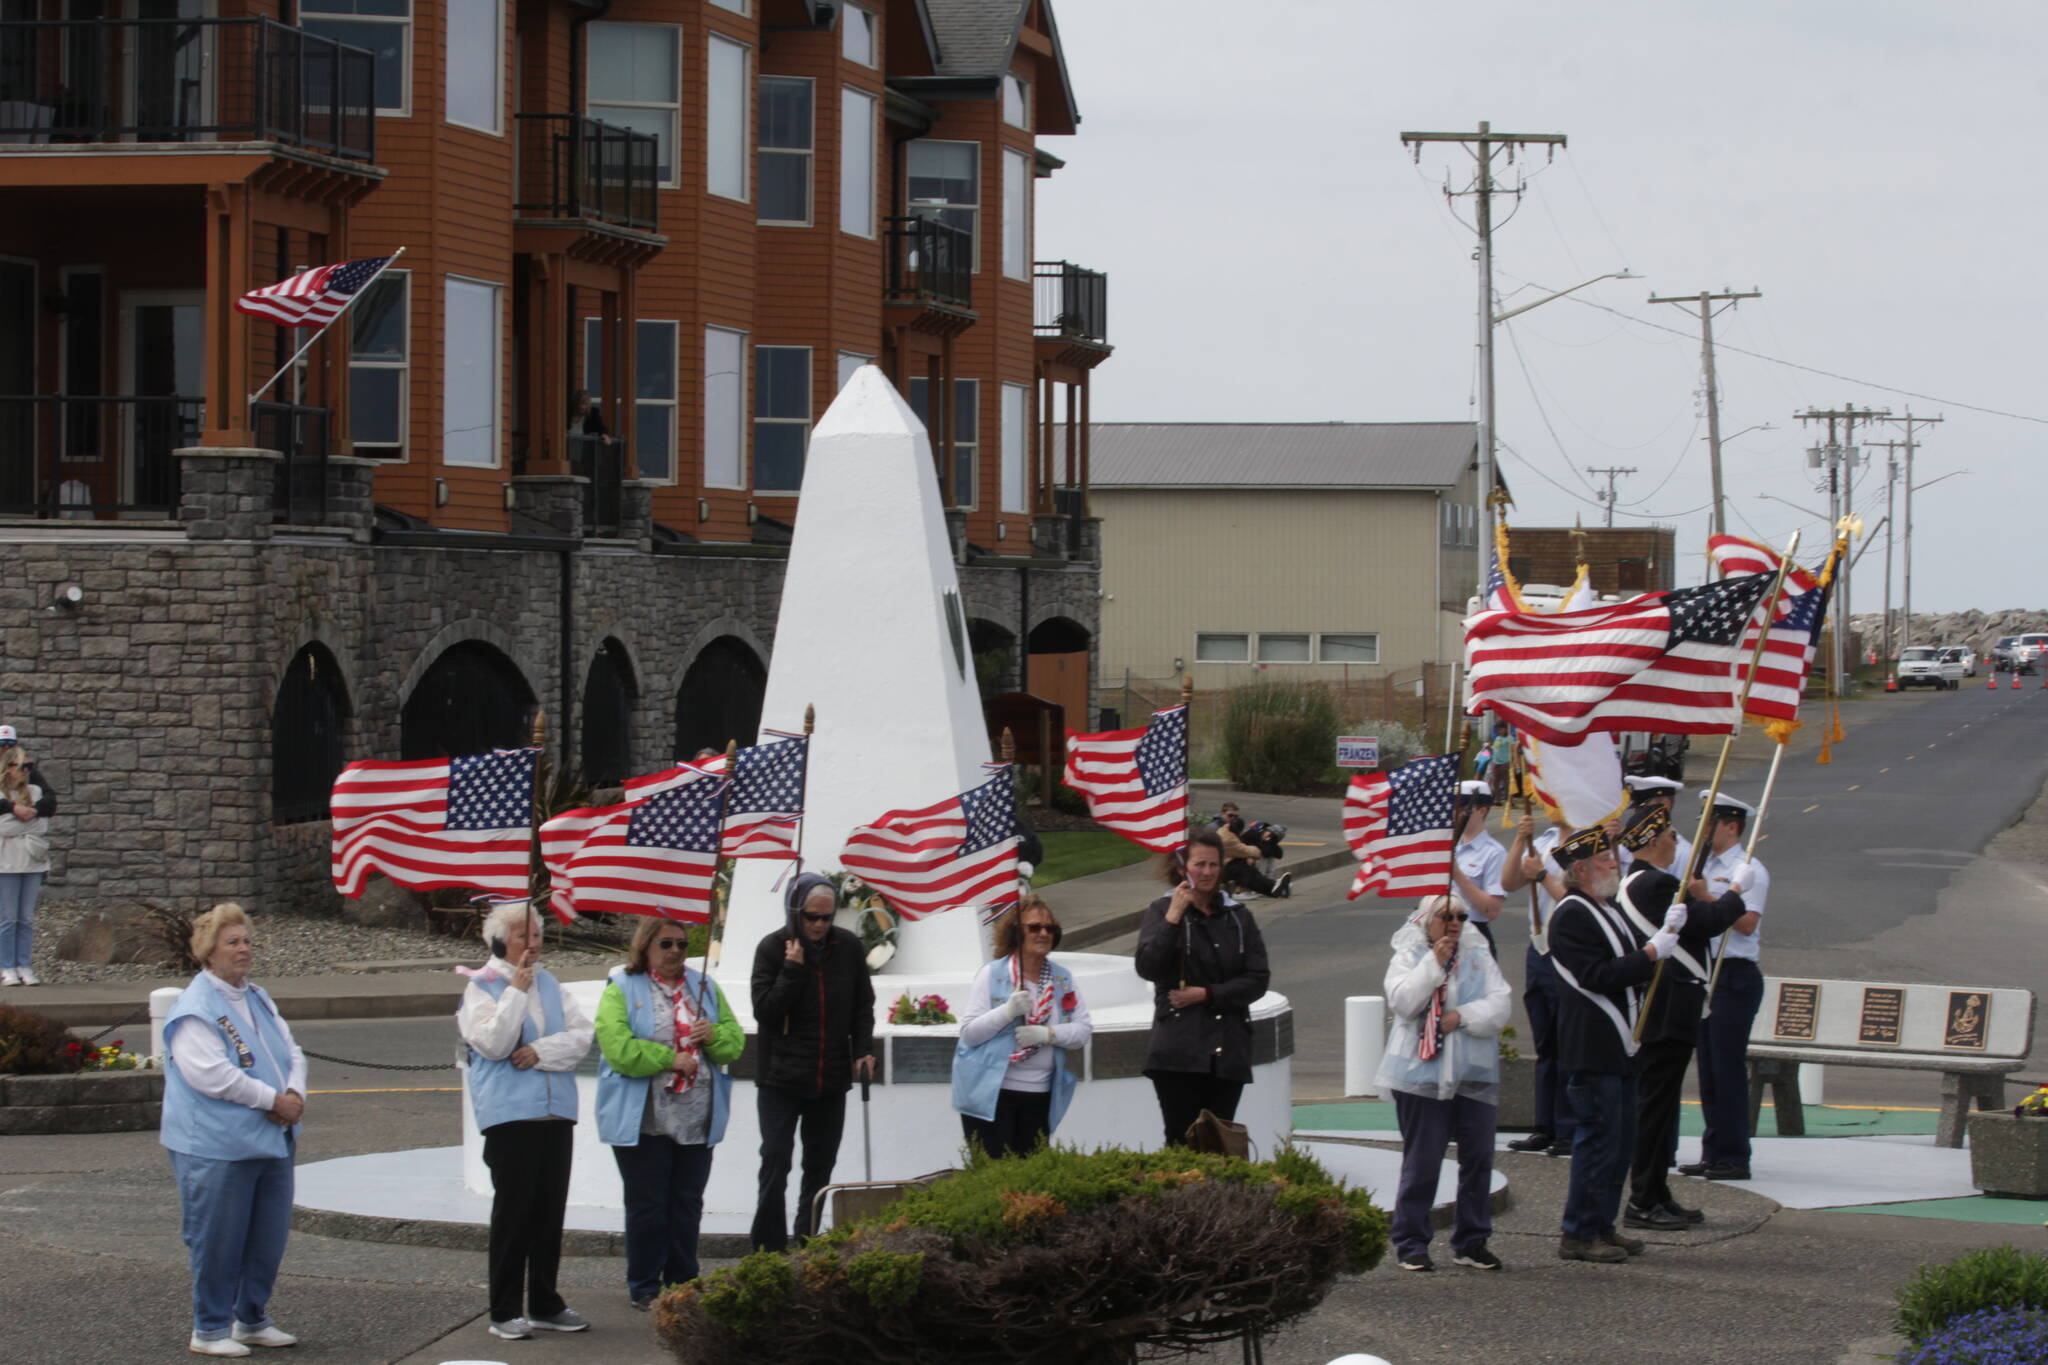 A Coast Guard color guard and veterans organizations parade the colors during the remembrance of those who put out to sea and did not return on May 28 in Westport. (Michael S. Lockett / The Daily World)